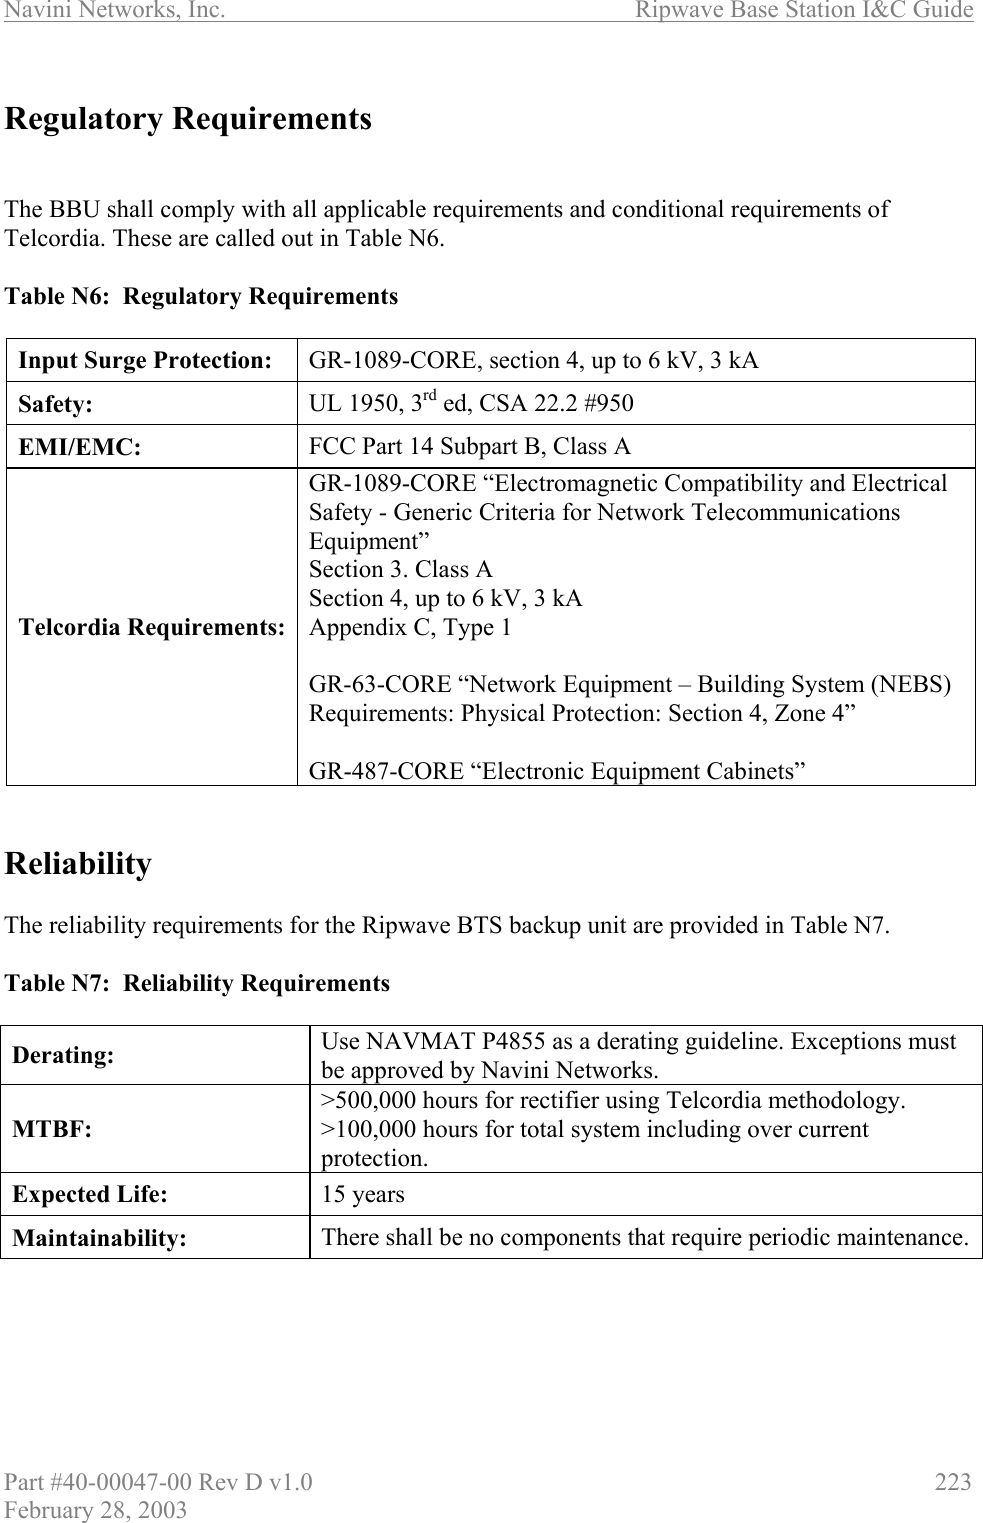 Navini Networks, Inc.                          Ripwave Base Station I&amp;C Guide Part #40-00047-00 Rev D v1.0                     223 February 28, 2003  Regulatory Requirements   The BBU shall comply with all applicable requirements and conditional requirements of Telcordia. These are called out in Table N6.  Table N6:  Regulatory Requirements  Input Surge Protection:  GR-1089-CORE, section 4, up to 6 kV, 3 kA Safety:  UL 1950, 3rd ed, CSA 22.2 #950 EMI/EMC:  FCC Part 14 Subpart B, Class A Telcordia Requirements: GR-1089-CORE “Electromagnetic Compatibility and Electrical Safety - Generic Criteria for Network Telecommunications Equipment” Section 3. Class A Section 4, up to 6 kV, 3 kA Appendix C, Type 1  GR-63-CORE “Network Equipment – Building System (NEBS) Requirements: Physical Protection: Section 4, Zone 4”  GR-487-CORE “Electronic Equipment Cabinets”   Reliability  The reliability requirements for the Ripwave BTS backup unit are provided in Table N7.  Table N7:  Reliability Requirements  Derating:  Use NAVMAT P4855 as a derating guideline. Exceptions must be approved by Navini Networks. MTBF: &gt;500,000 hours for rectifier using Telcordia methodology. &gt;100,000 hours for total system including over current protection. Expected Life:  15 years Maintainability:  There shall be no components that require periodic maintenance. 